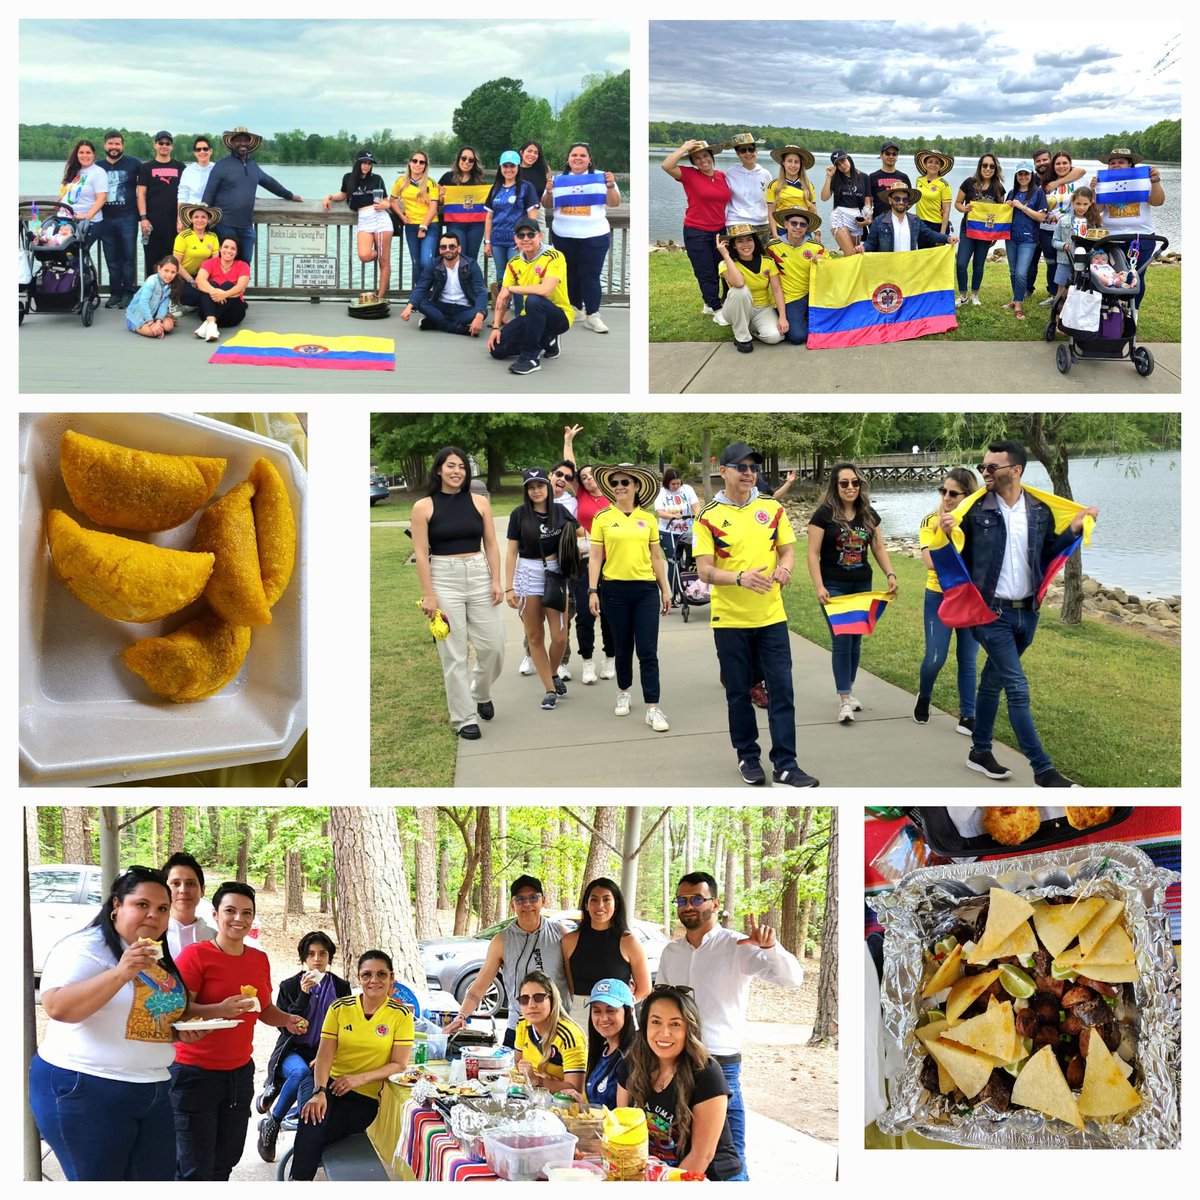 What a wonderful afternoon spent with fantastic company and delectable dishes during our international potluck picnic.  Thanks, Ambassador Teachers from Catawba, Newton-Conover, Burke, and Hickory schools for attending. @ParticipateLrng #UnitingOurWorld #ConnectionsCoordinator